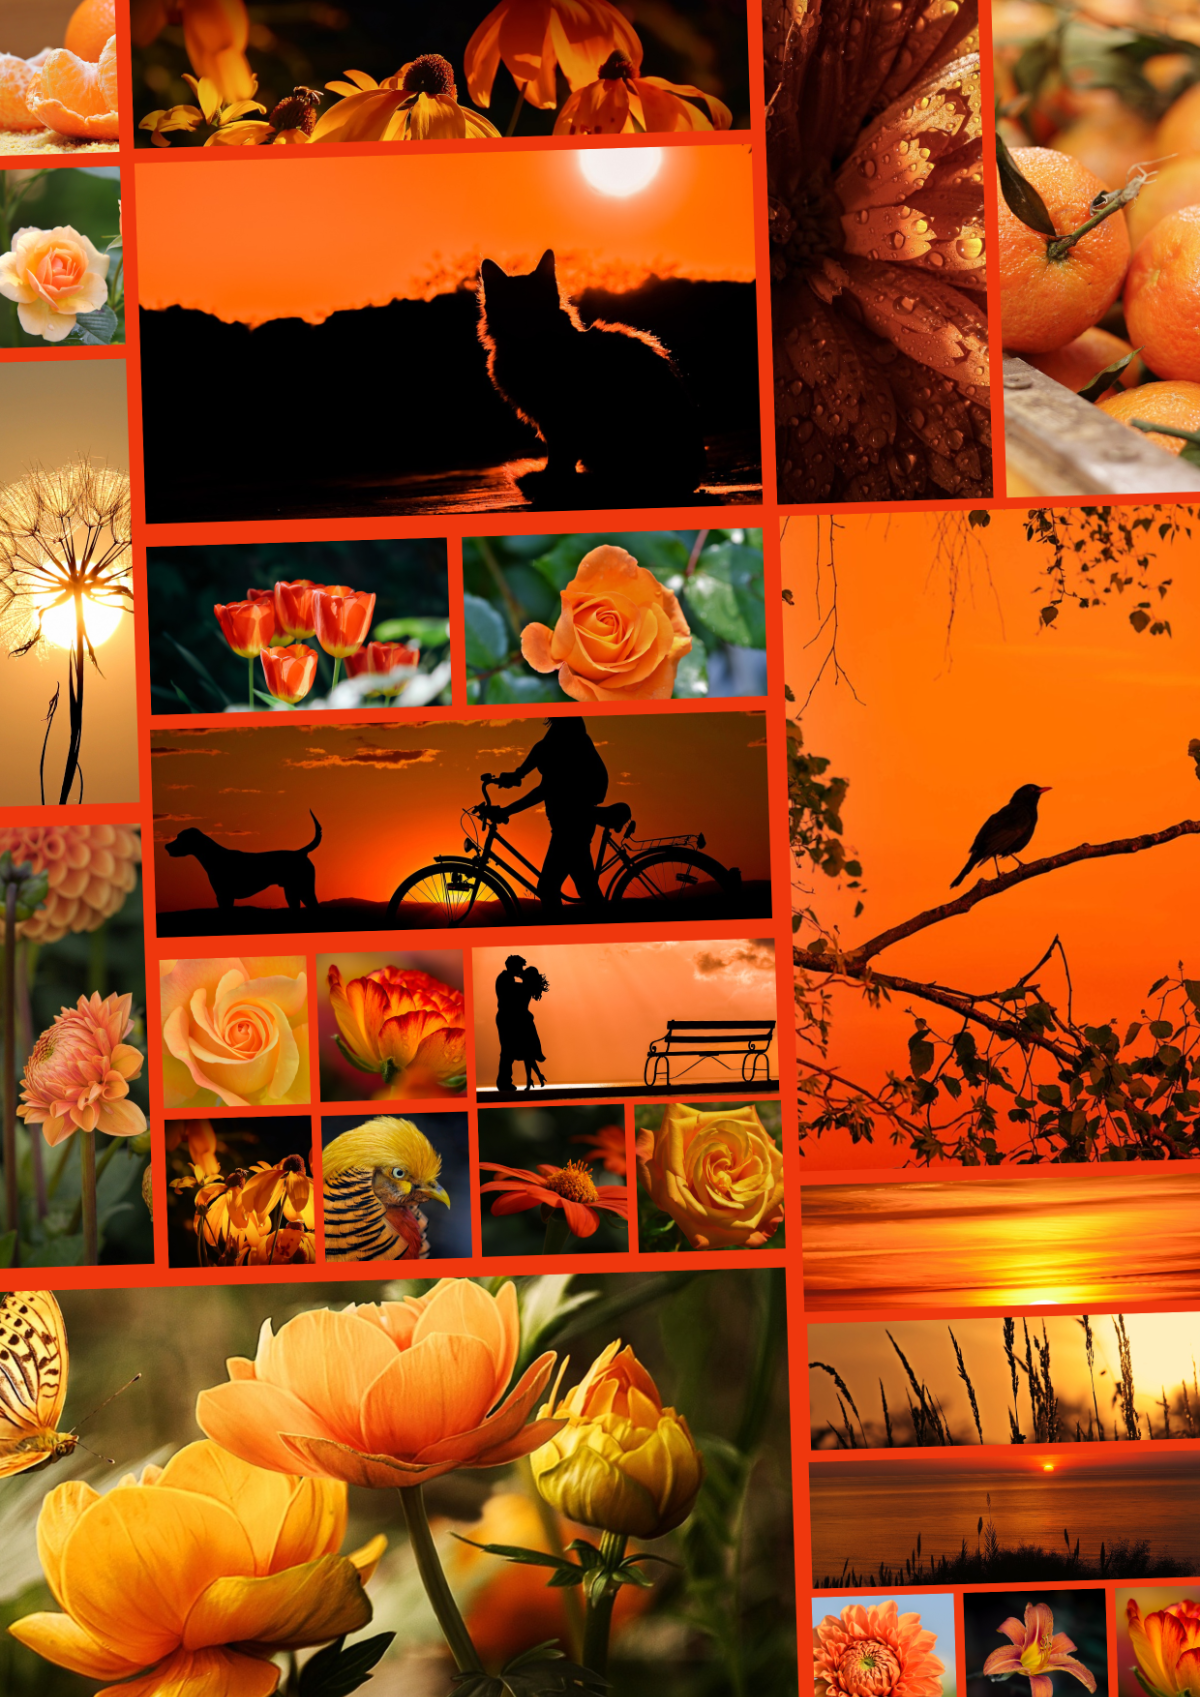 25 Photo Collage Template